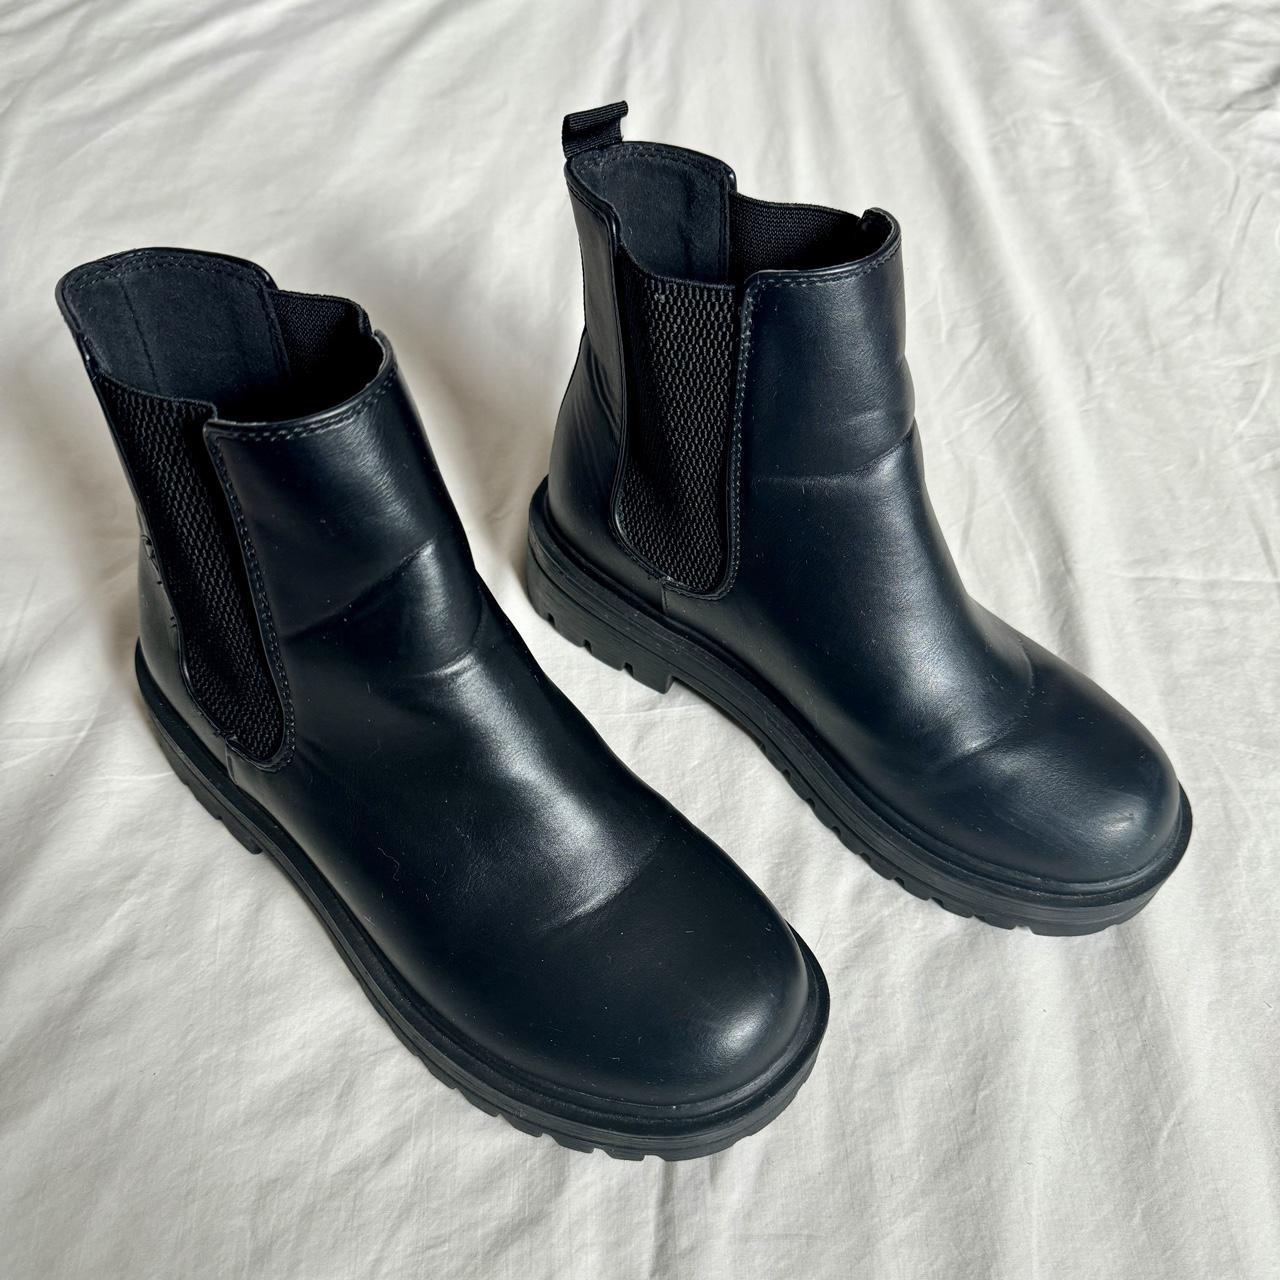 black chelsea boots super cute on just too small for... - Depop